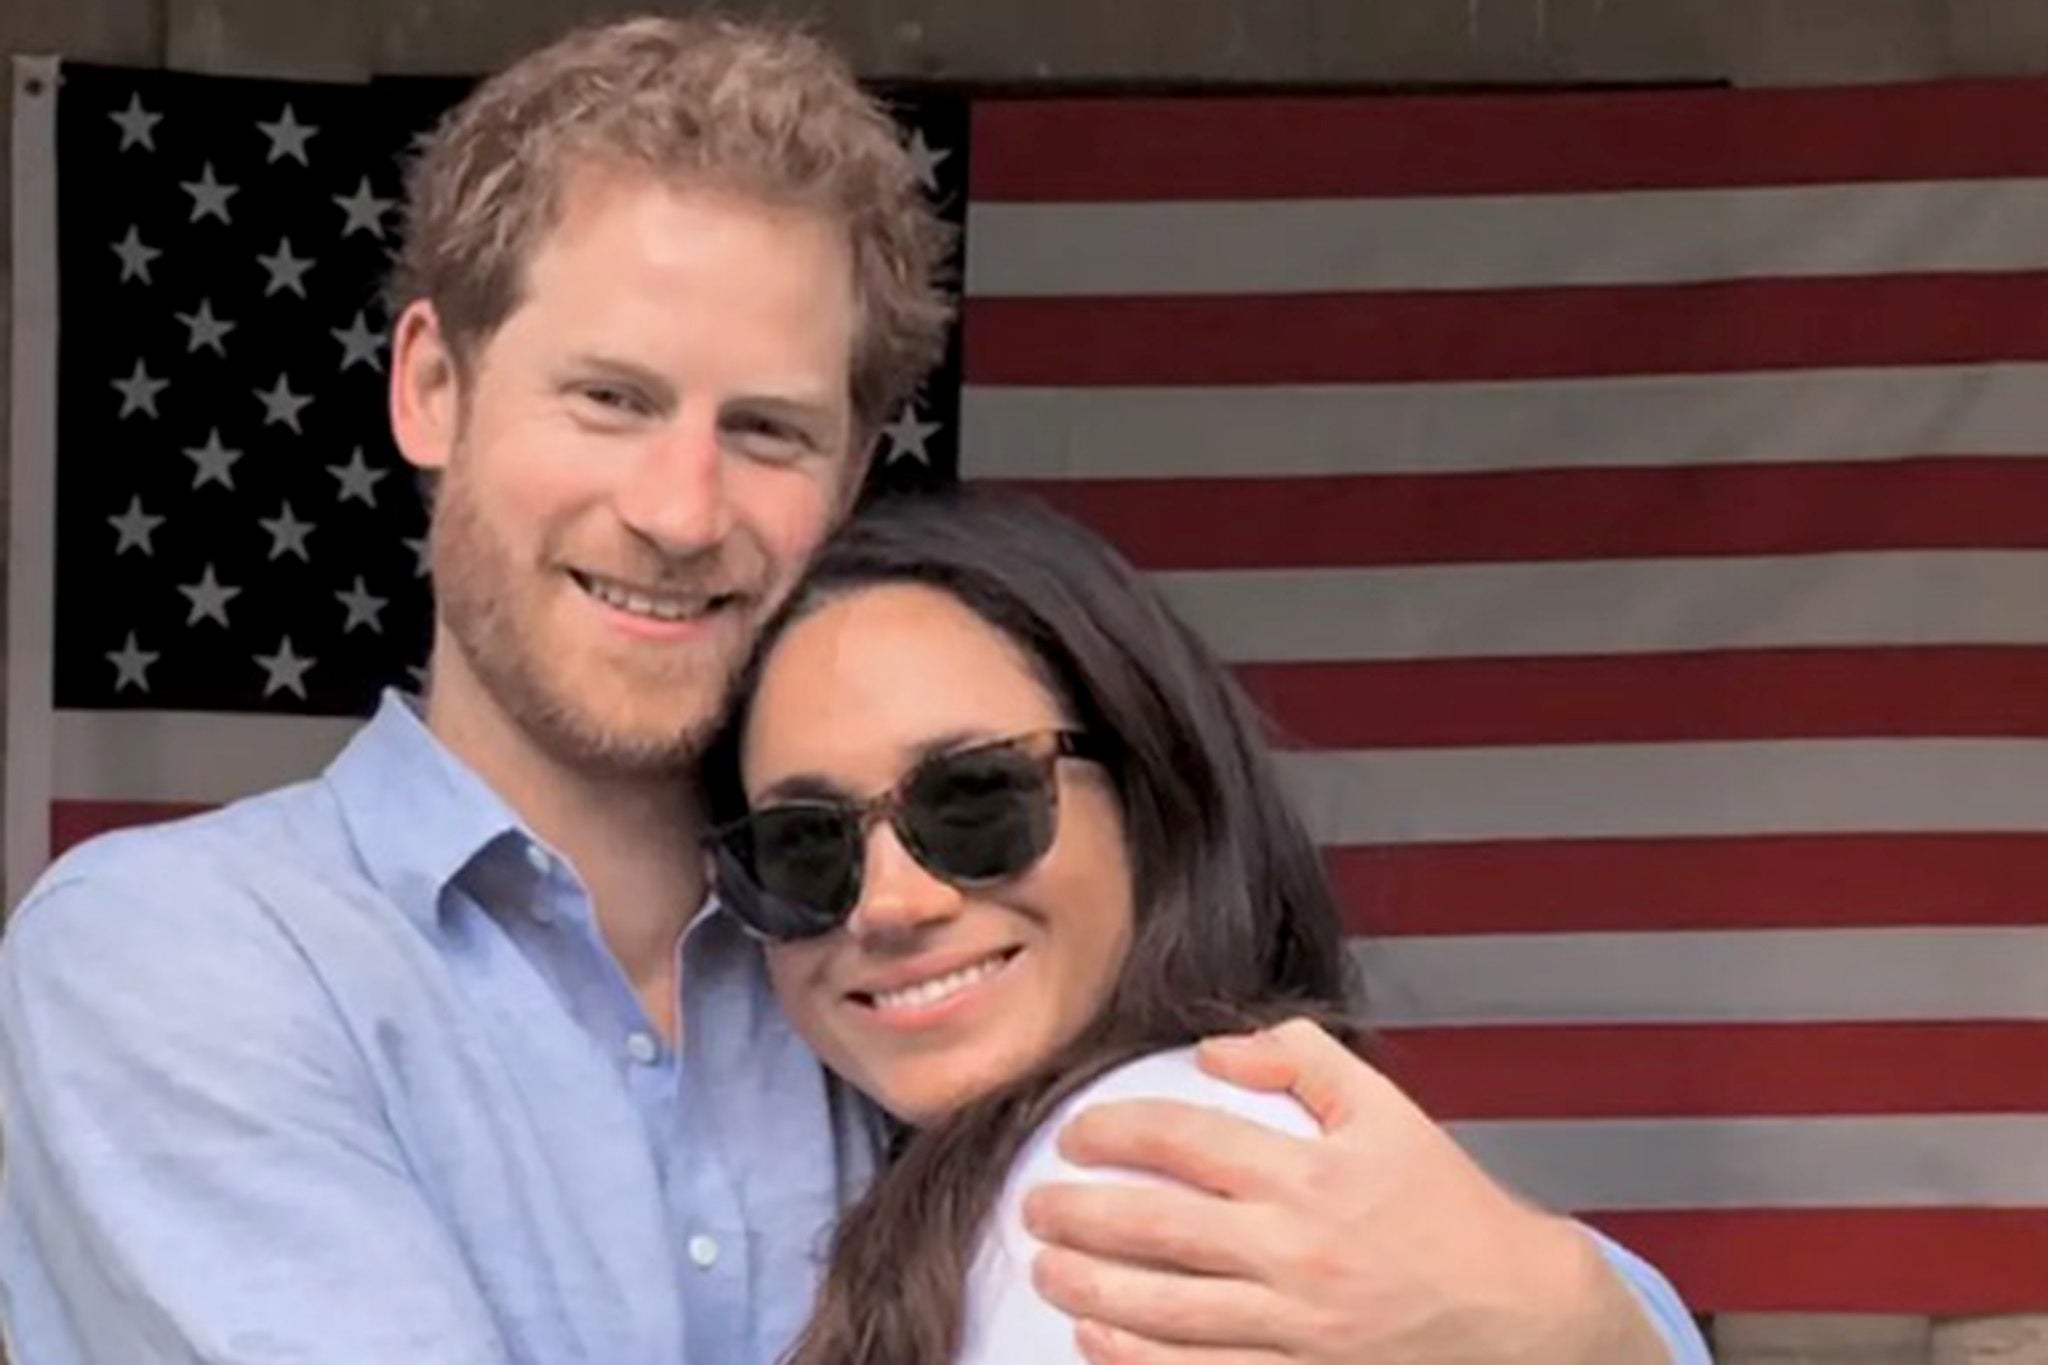 Meghan Markle does not appear to have seen the royals in almost two years.